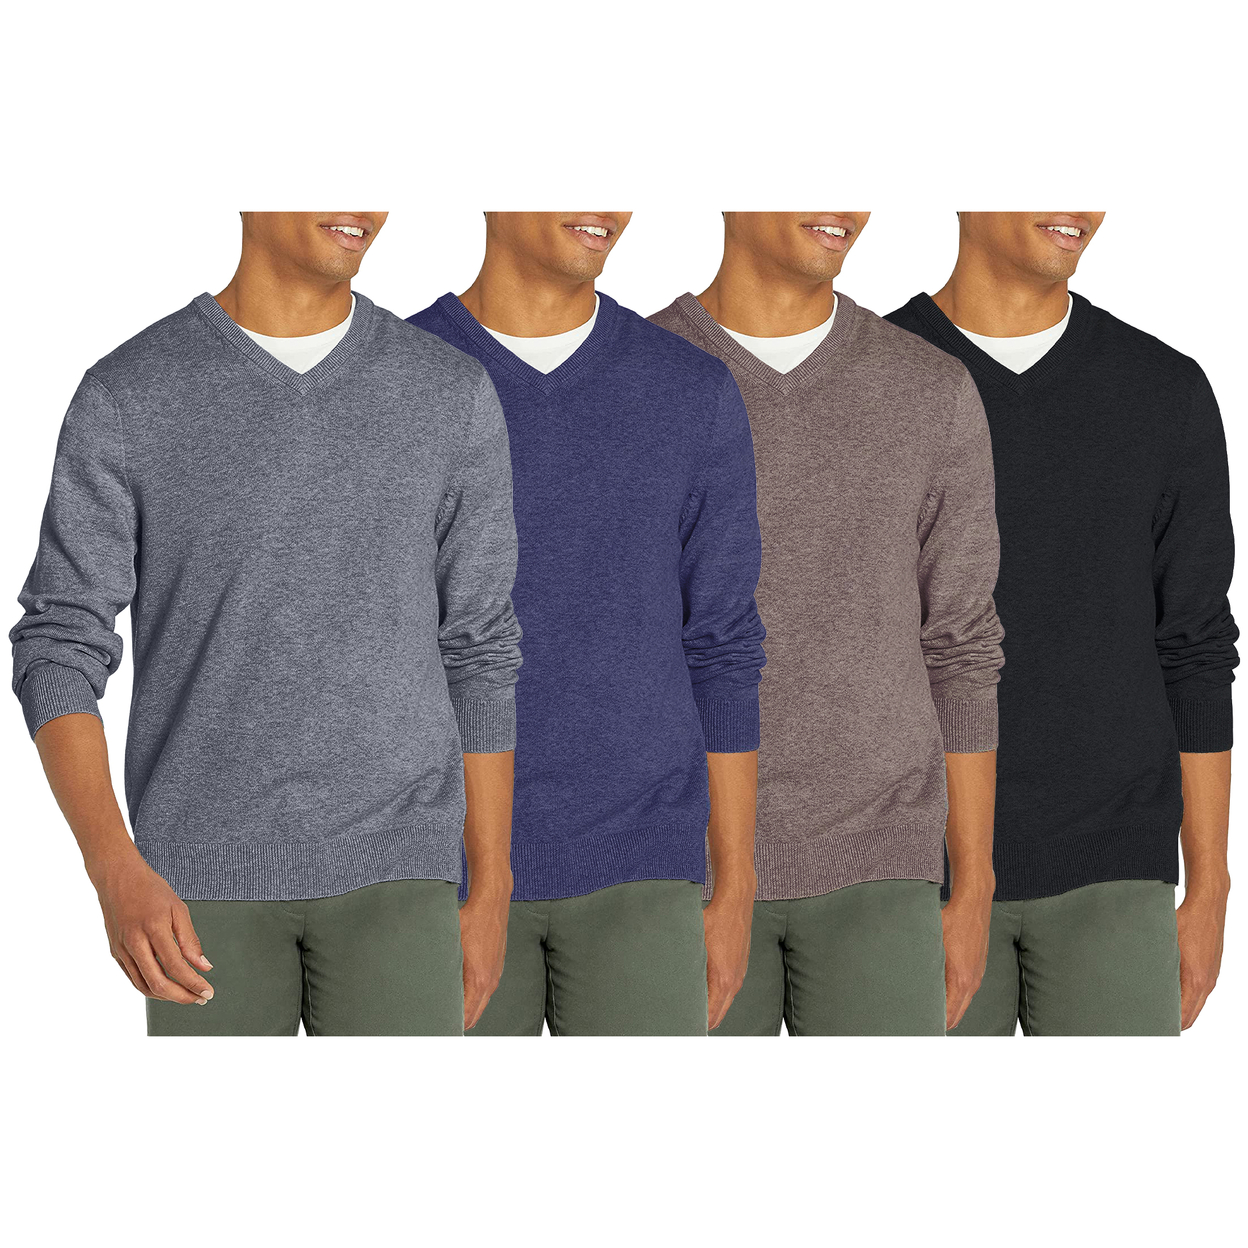 3-Pack: Men's Casual Ultra Soft Slim Fit Warm Knit V-Neck Sweater - Xx-large